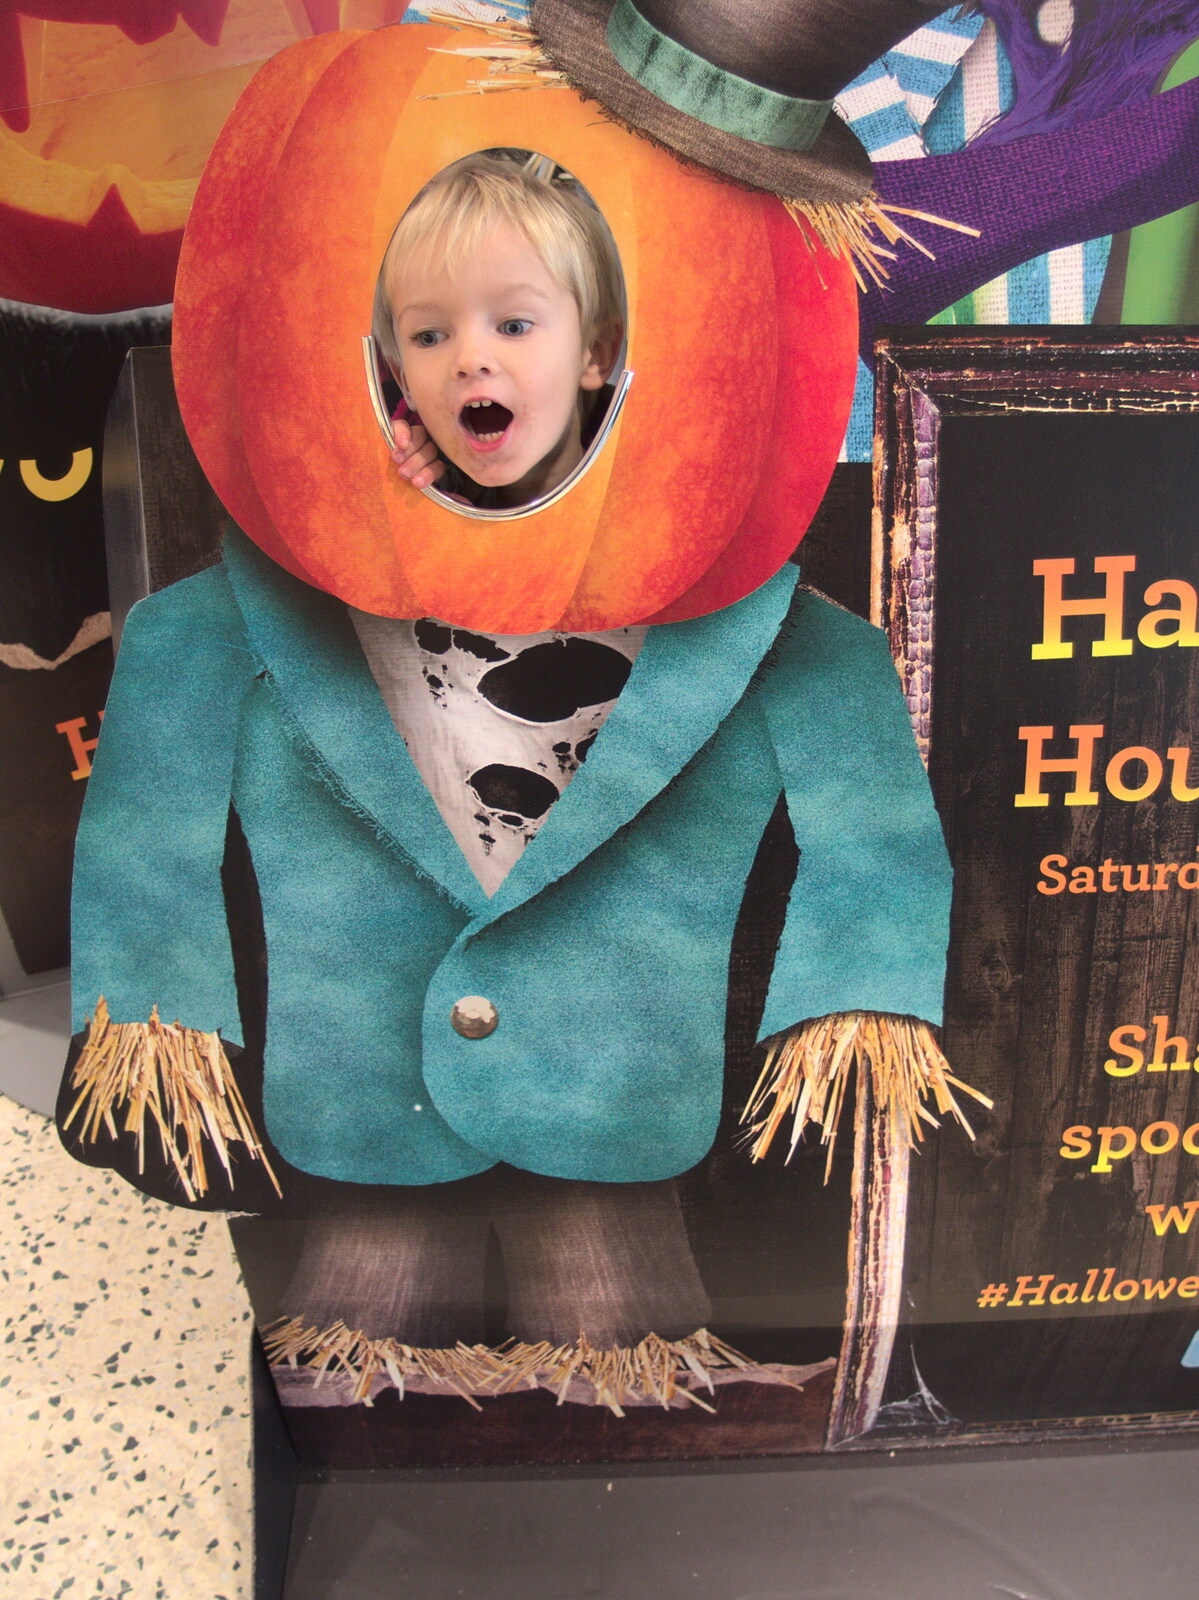 Harry shots from a cut-out in Morrisons from Fred's Gyrobot, Brome, Suffolk - 18th October 2015